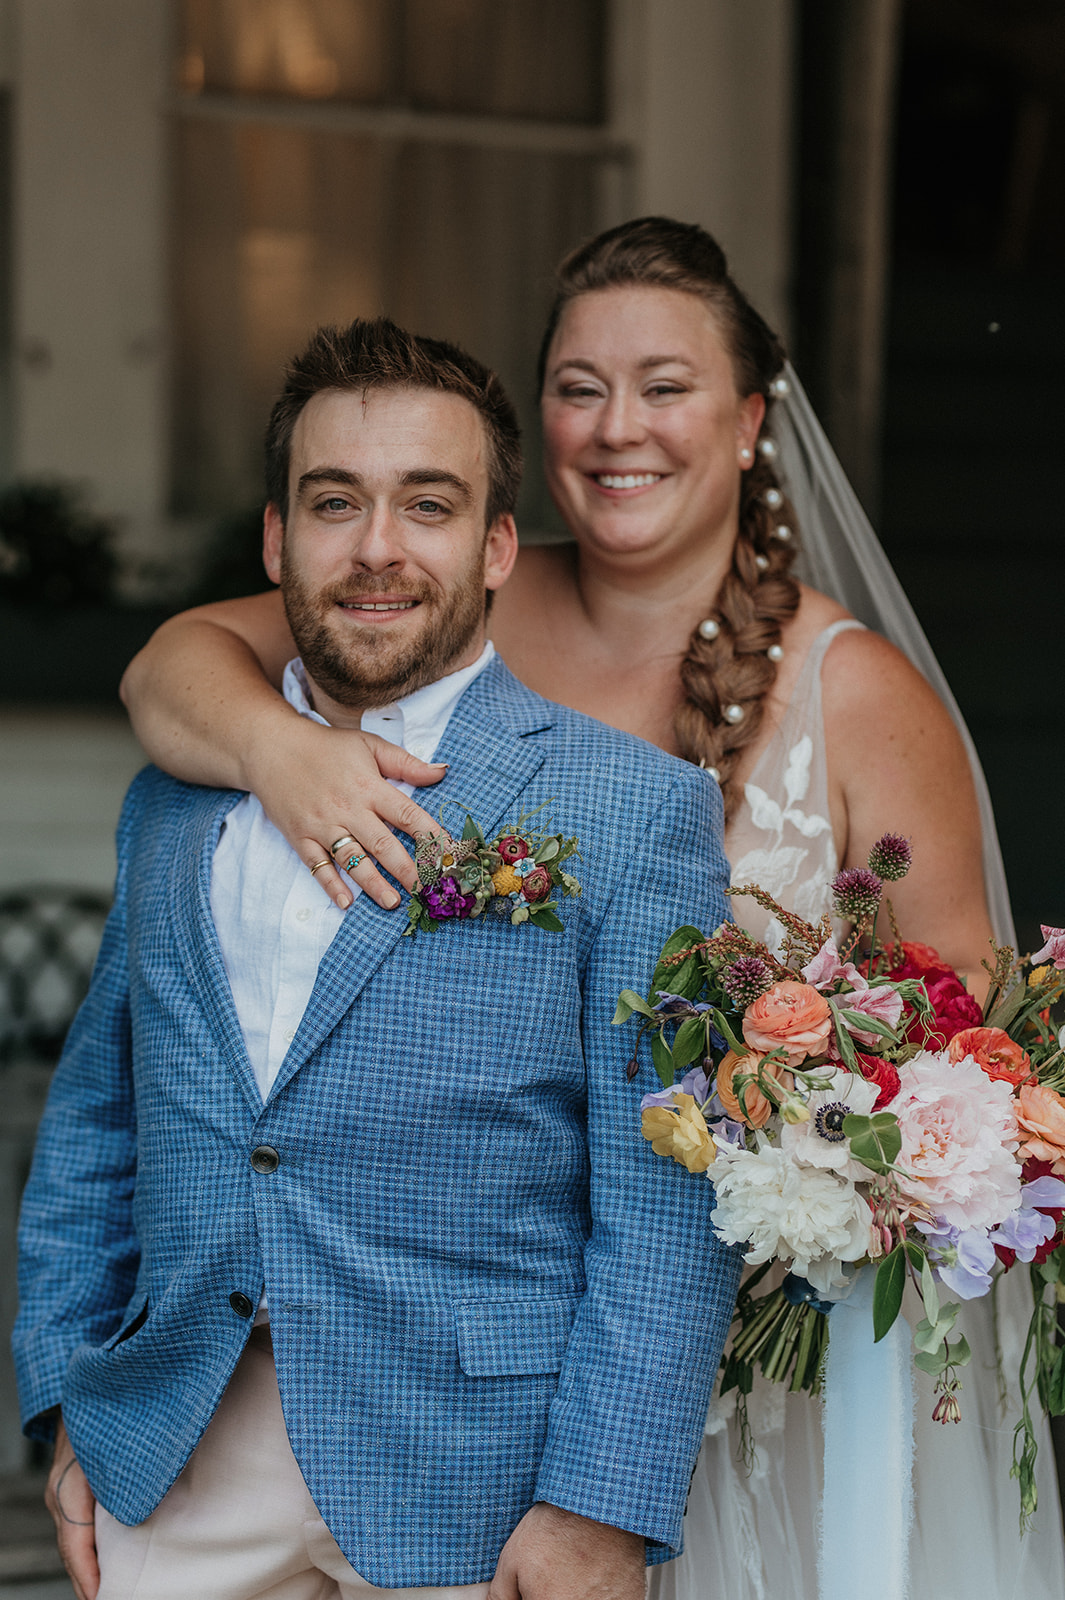 Bride and groom smile at camera together during portraits